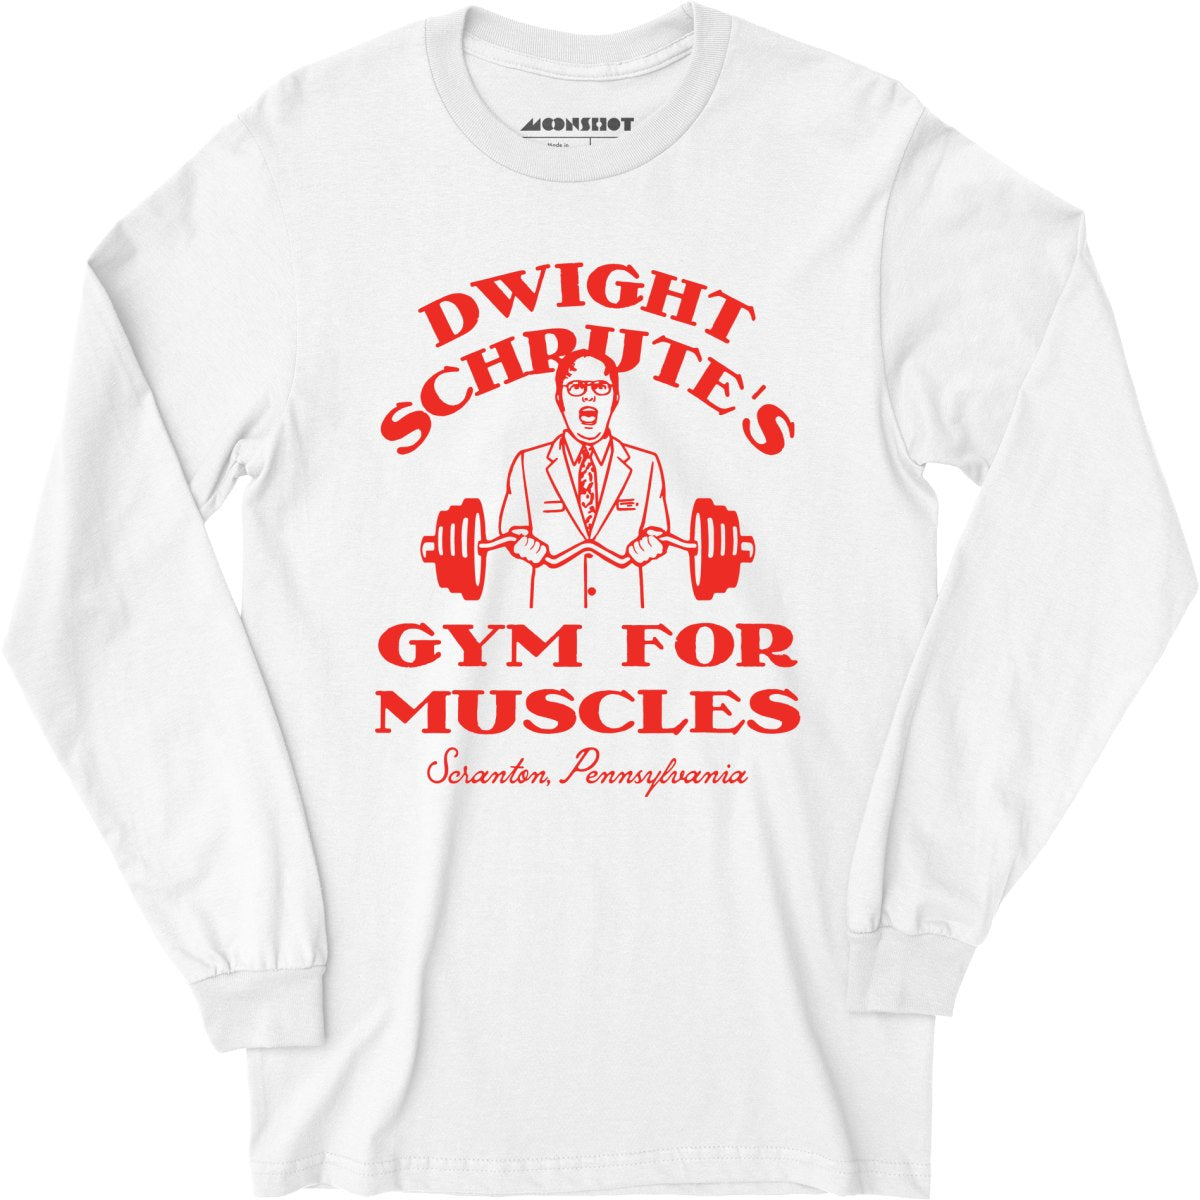 Dwight Schrute's Gym For Muscles - Long Sleeve T-Shirt